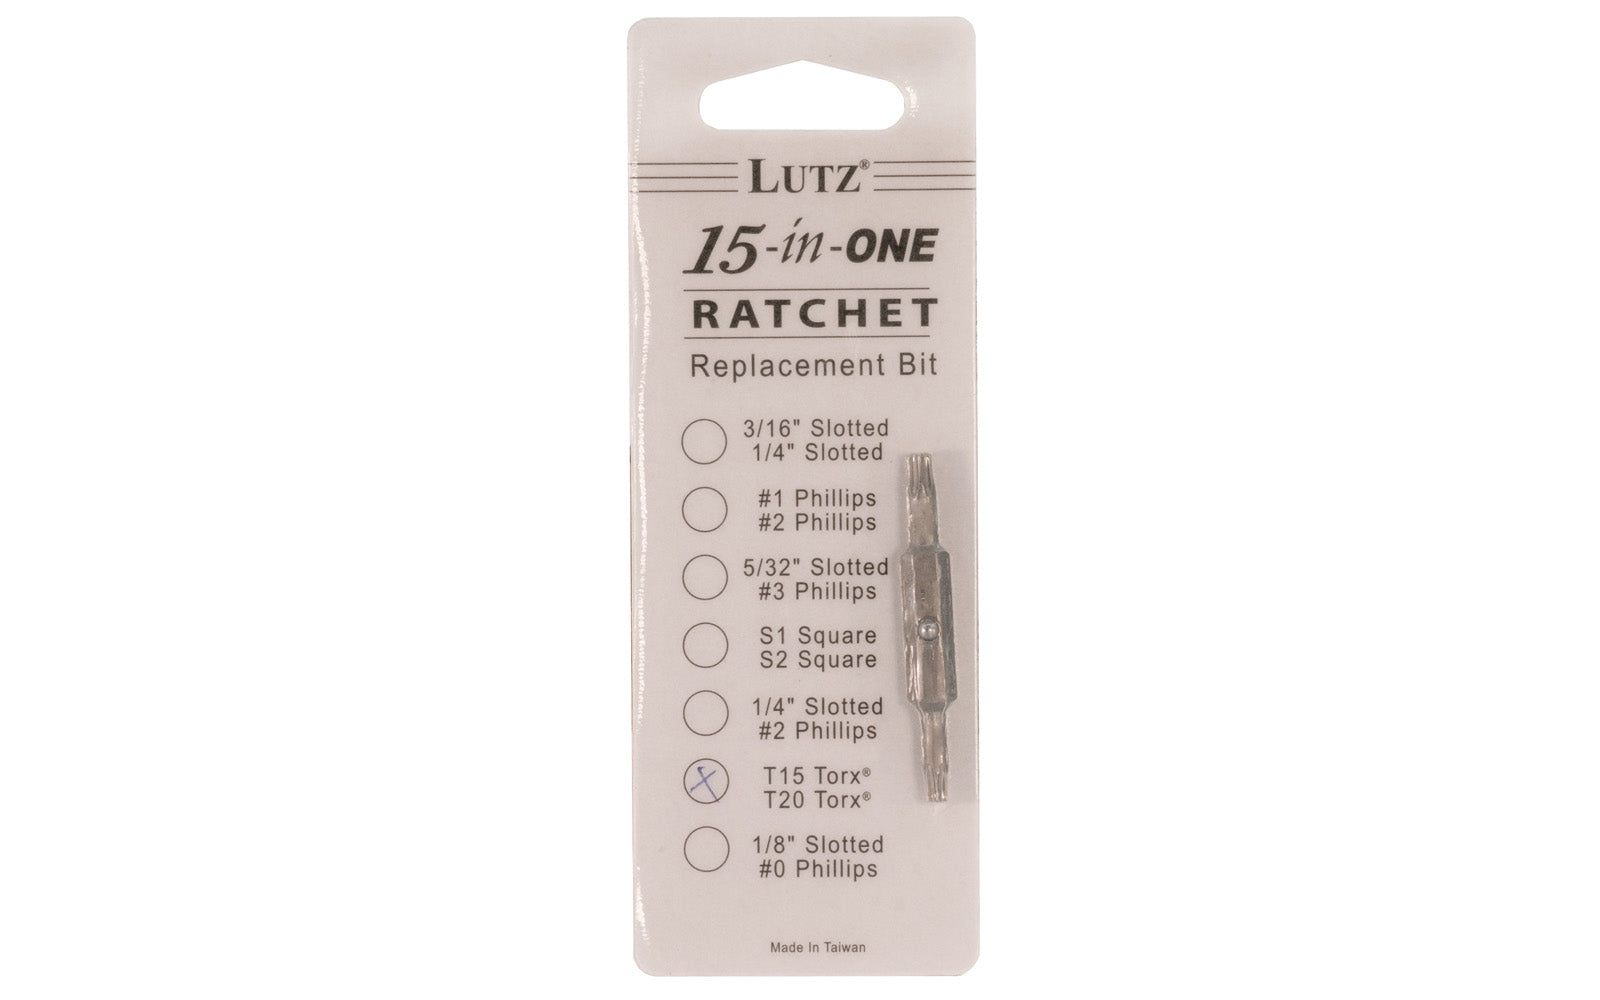 Lutz Torx 15 & Torx 20 Double Bit designed for the Lutz 15-in-1 Ratchet Screwdriver  See here. Made of chrome vanadium 6150 steel alloy, which is heat treated to a Rockwell of 58 to 60. 2